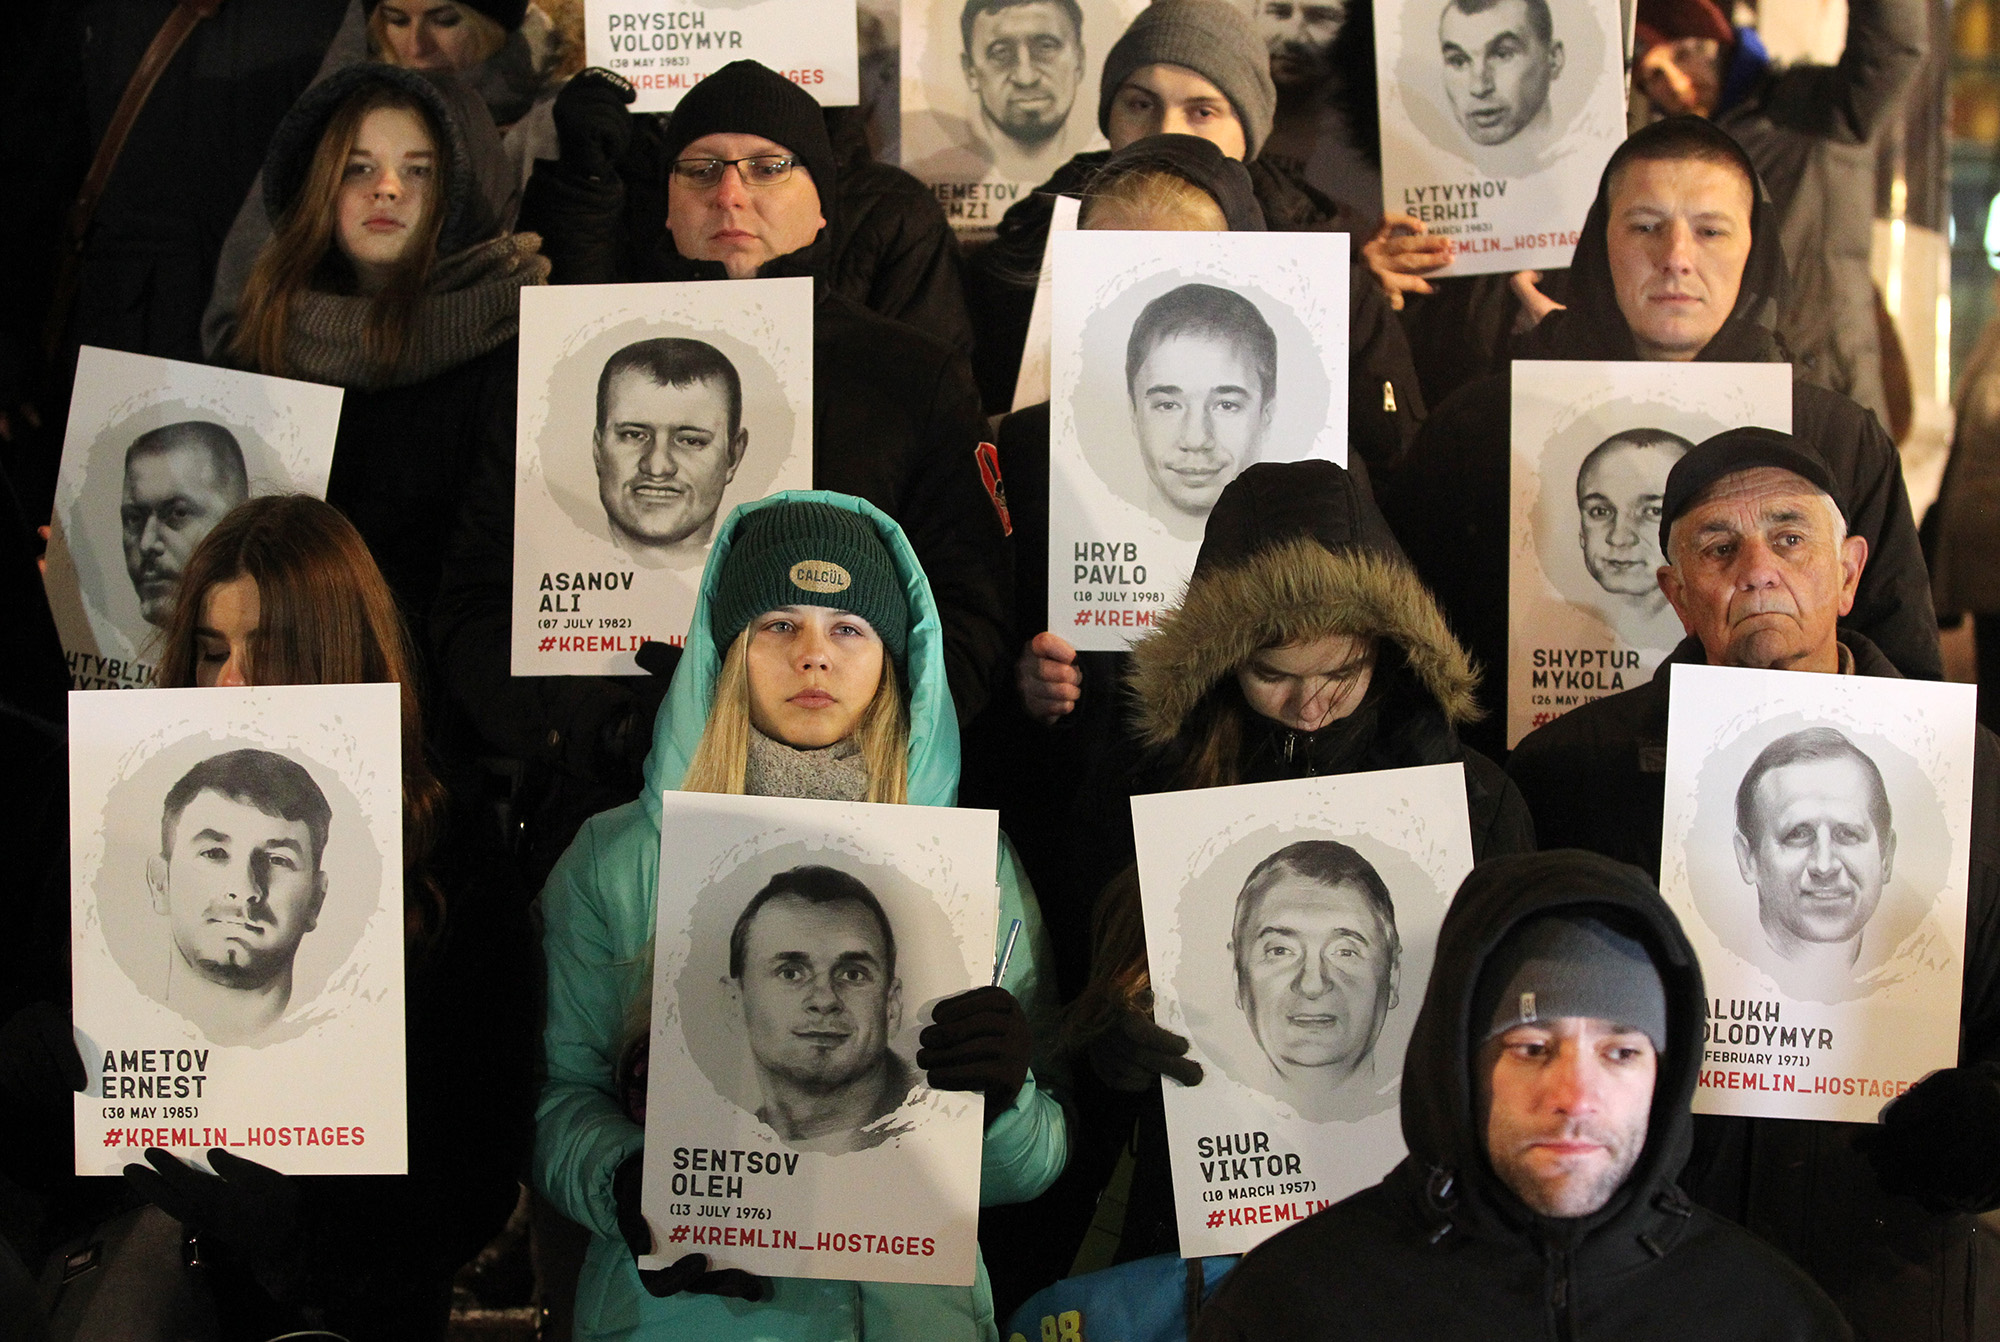 Ukrainians hold placards&nbsp;during a rally in support of the Ukrainian navy sailors who were seized by Russia.